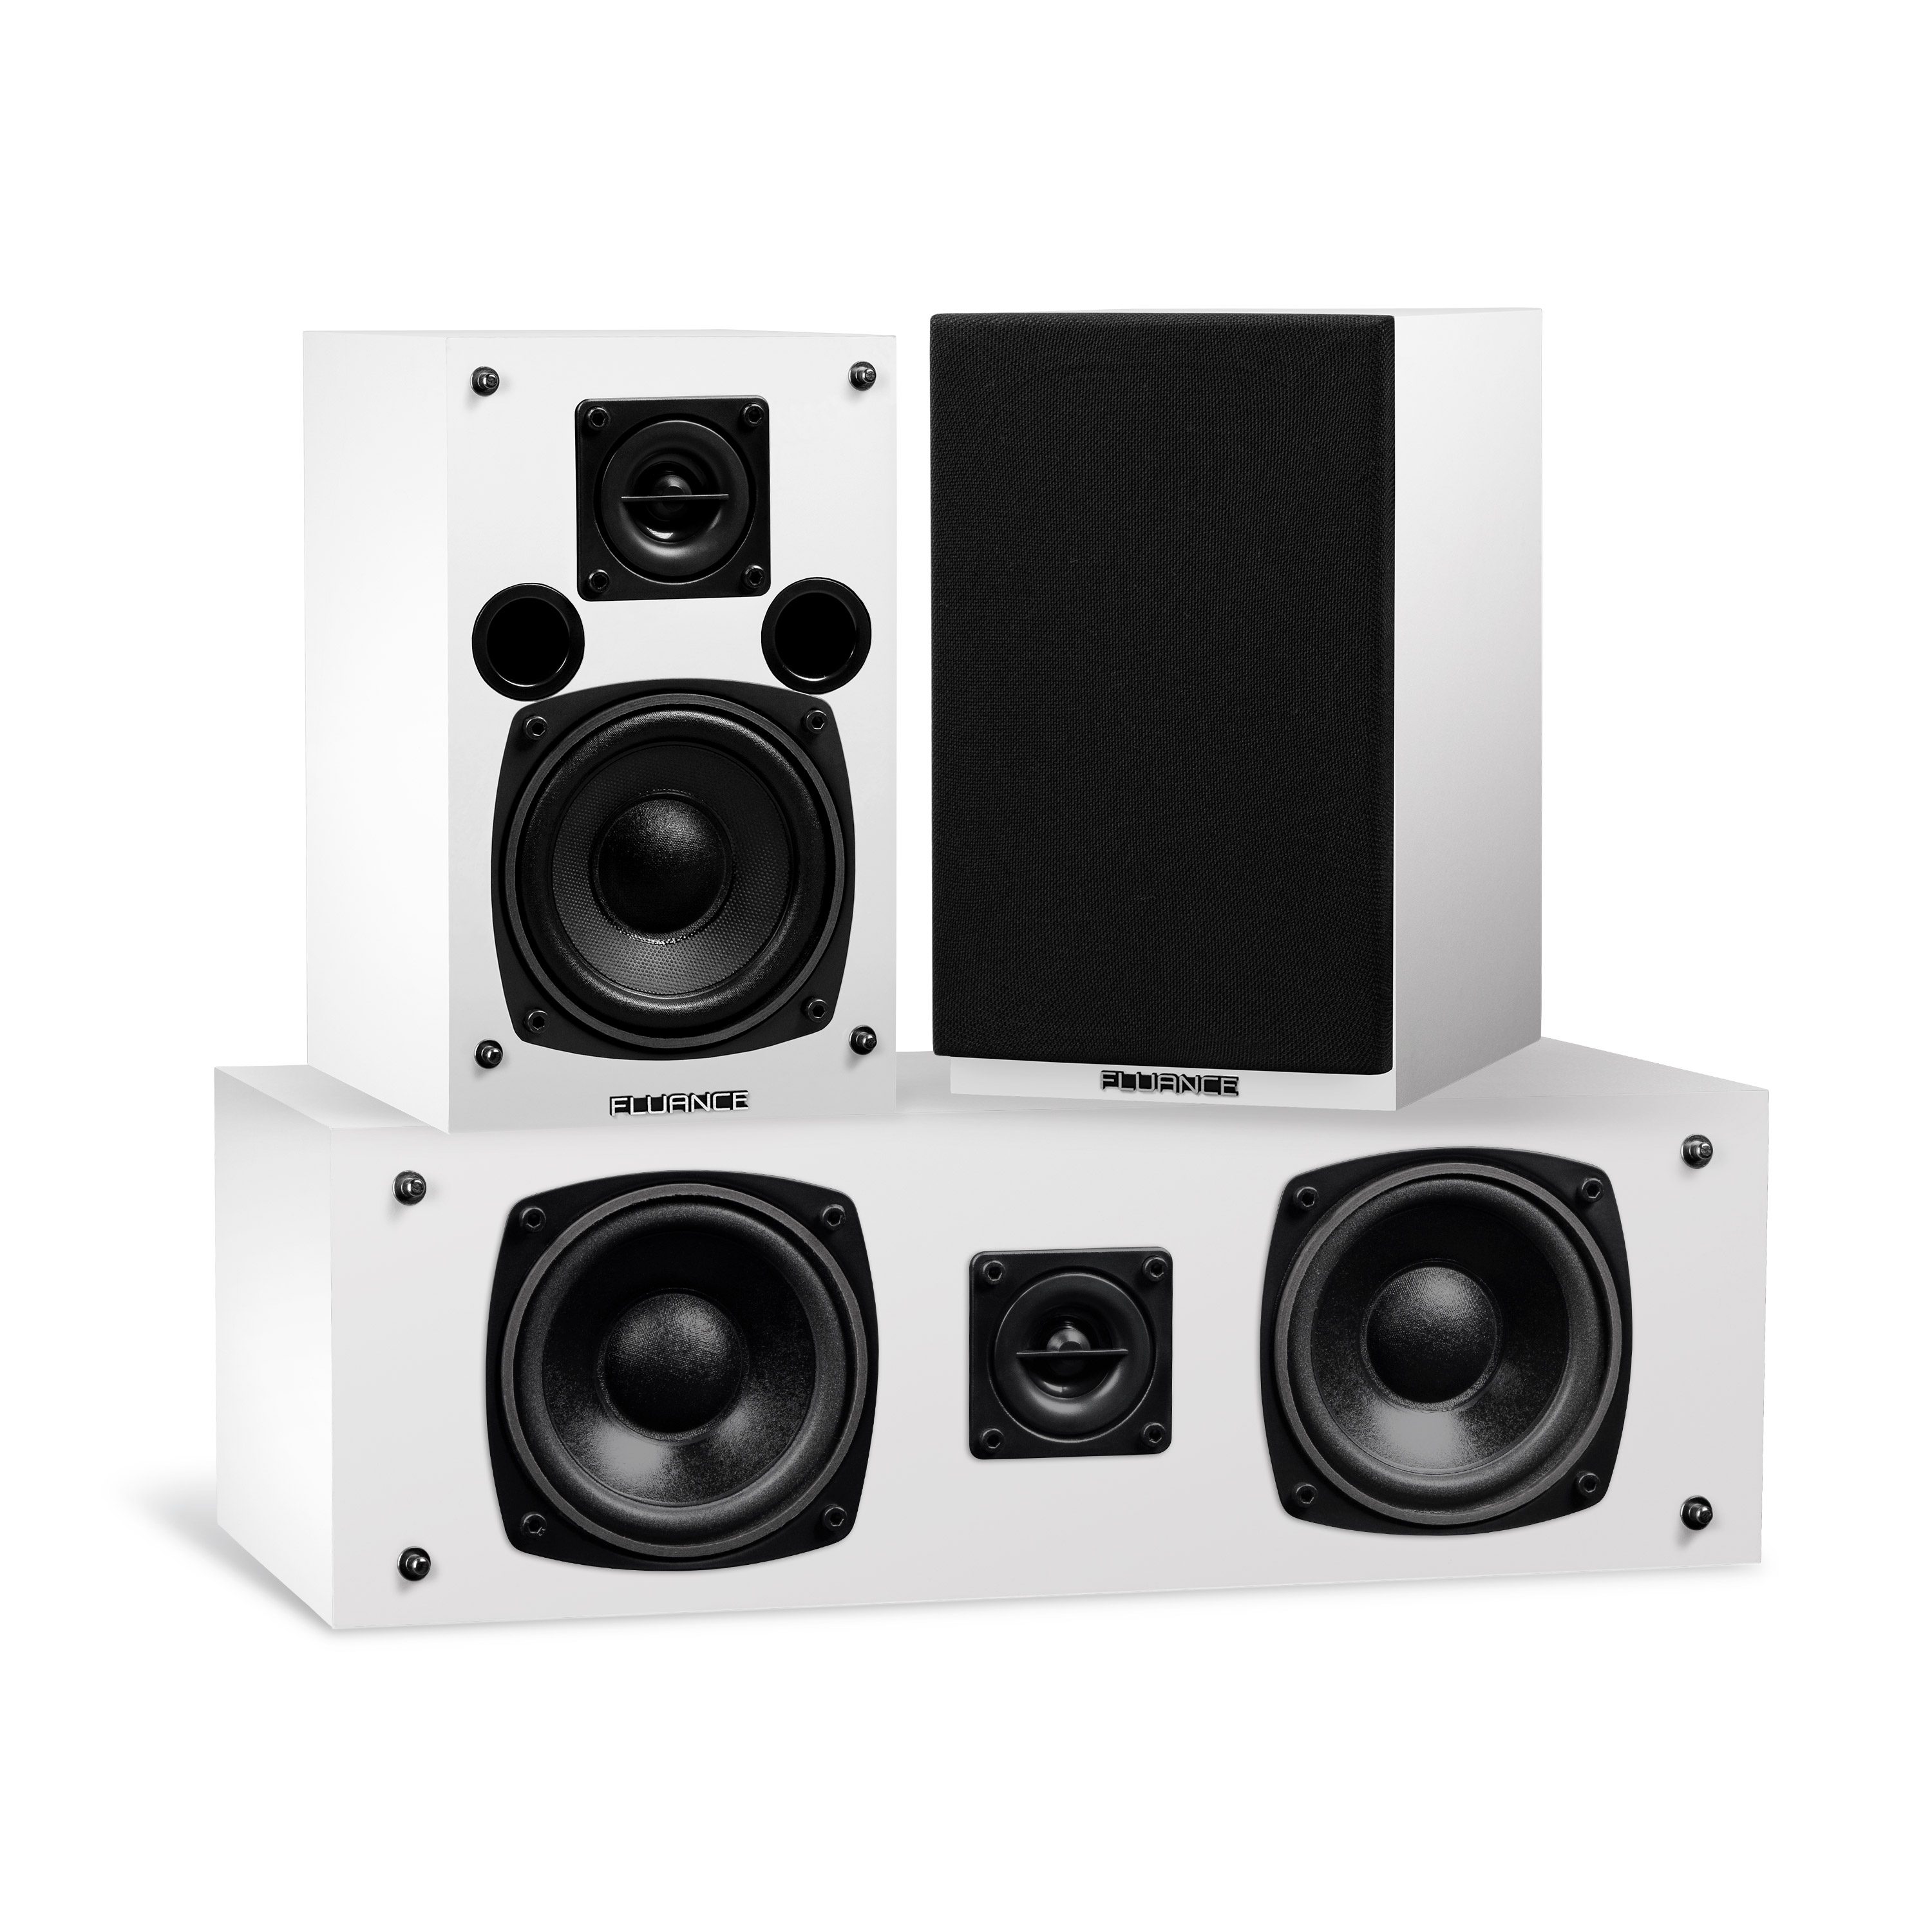 Fluance Elite Compact Home Theater 5.0 Speaker System - White - image 3 of 7